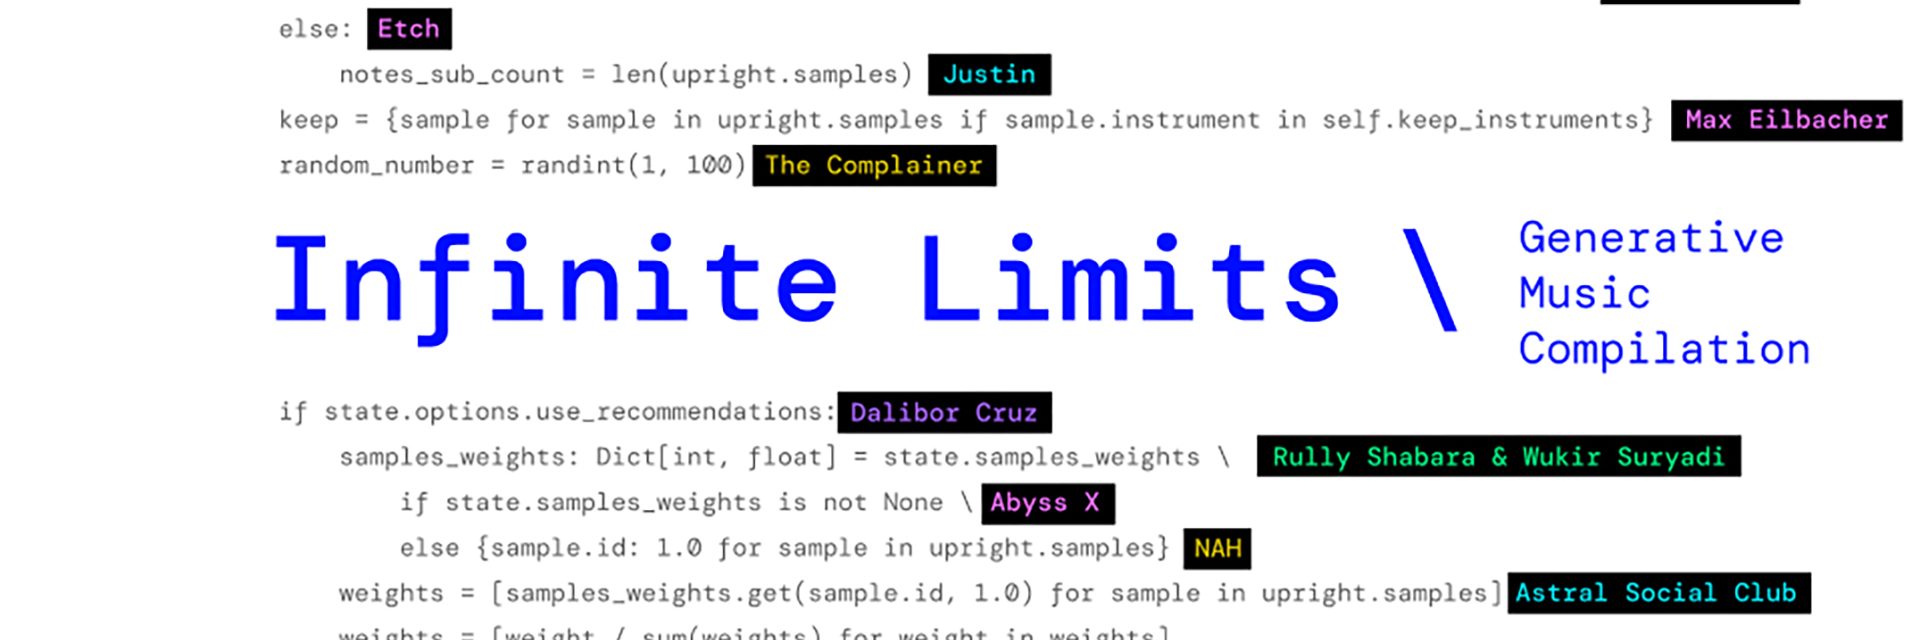 Mubert Releases AI-Generated Album Titled  â€œInfinite Limitsâ€� in Collaboration with 25 Artists â€” Mubert Blog